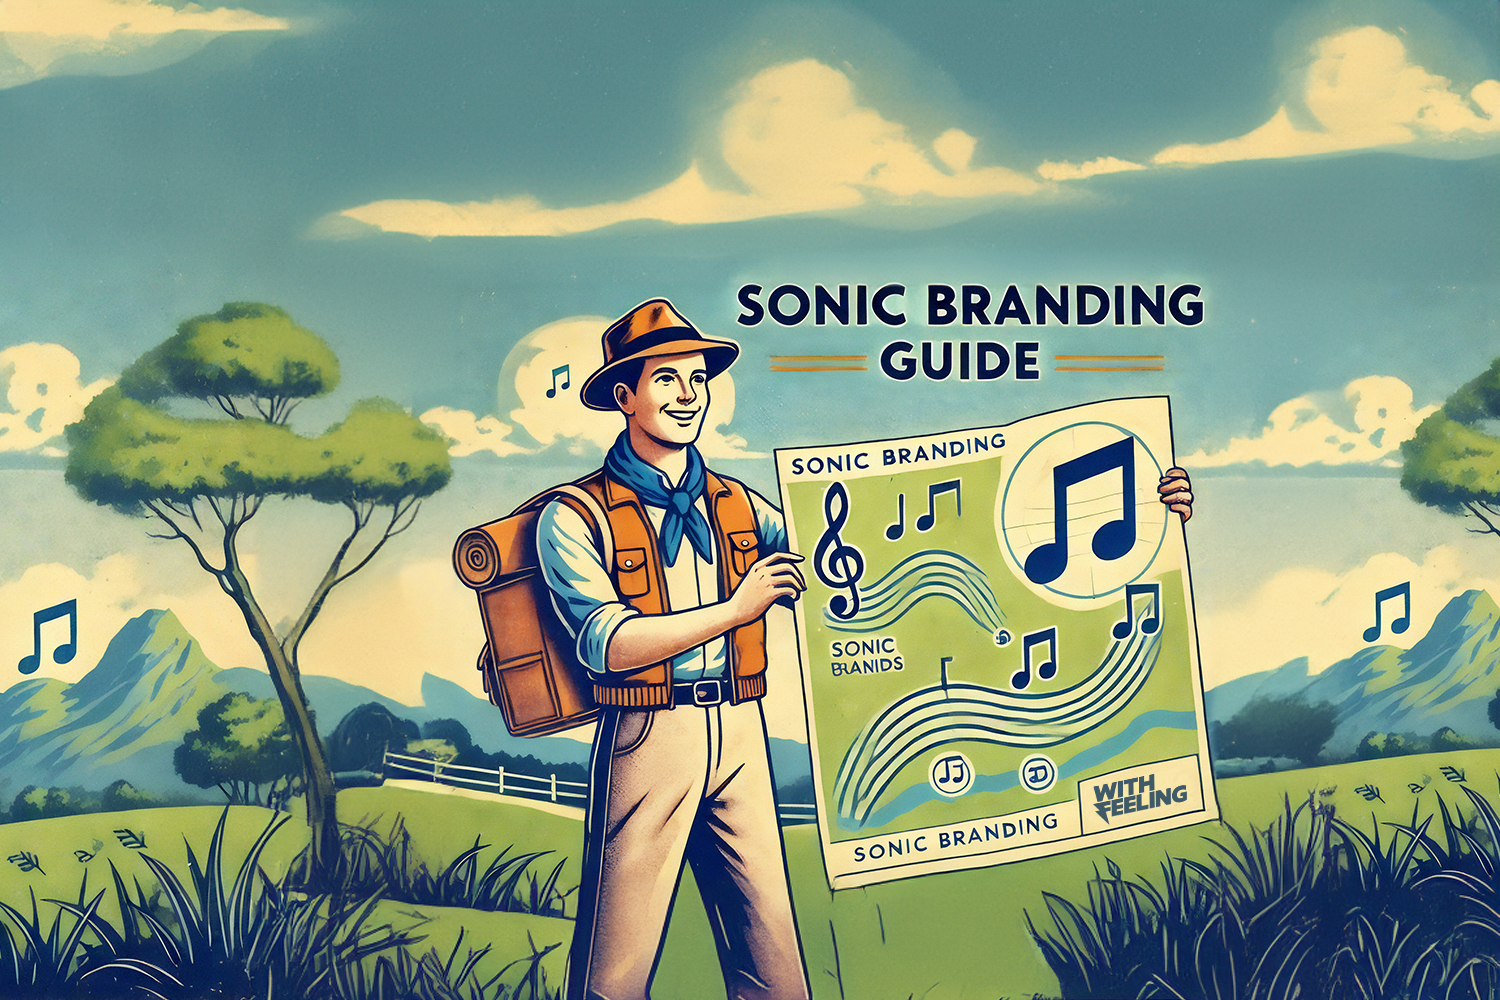 Definitive Guide to Sonic Branding